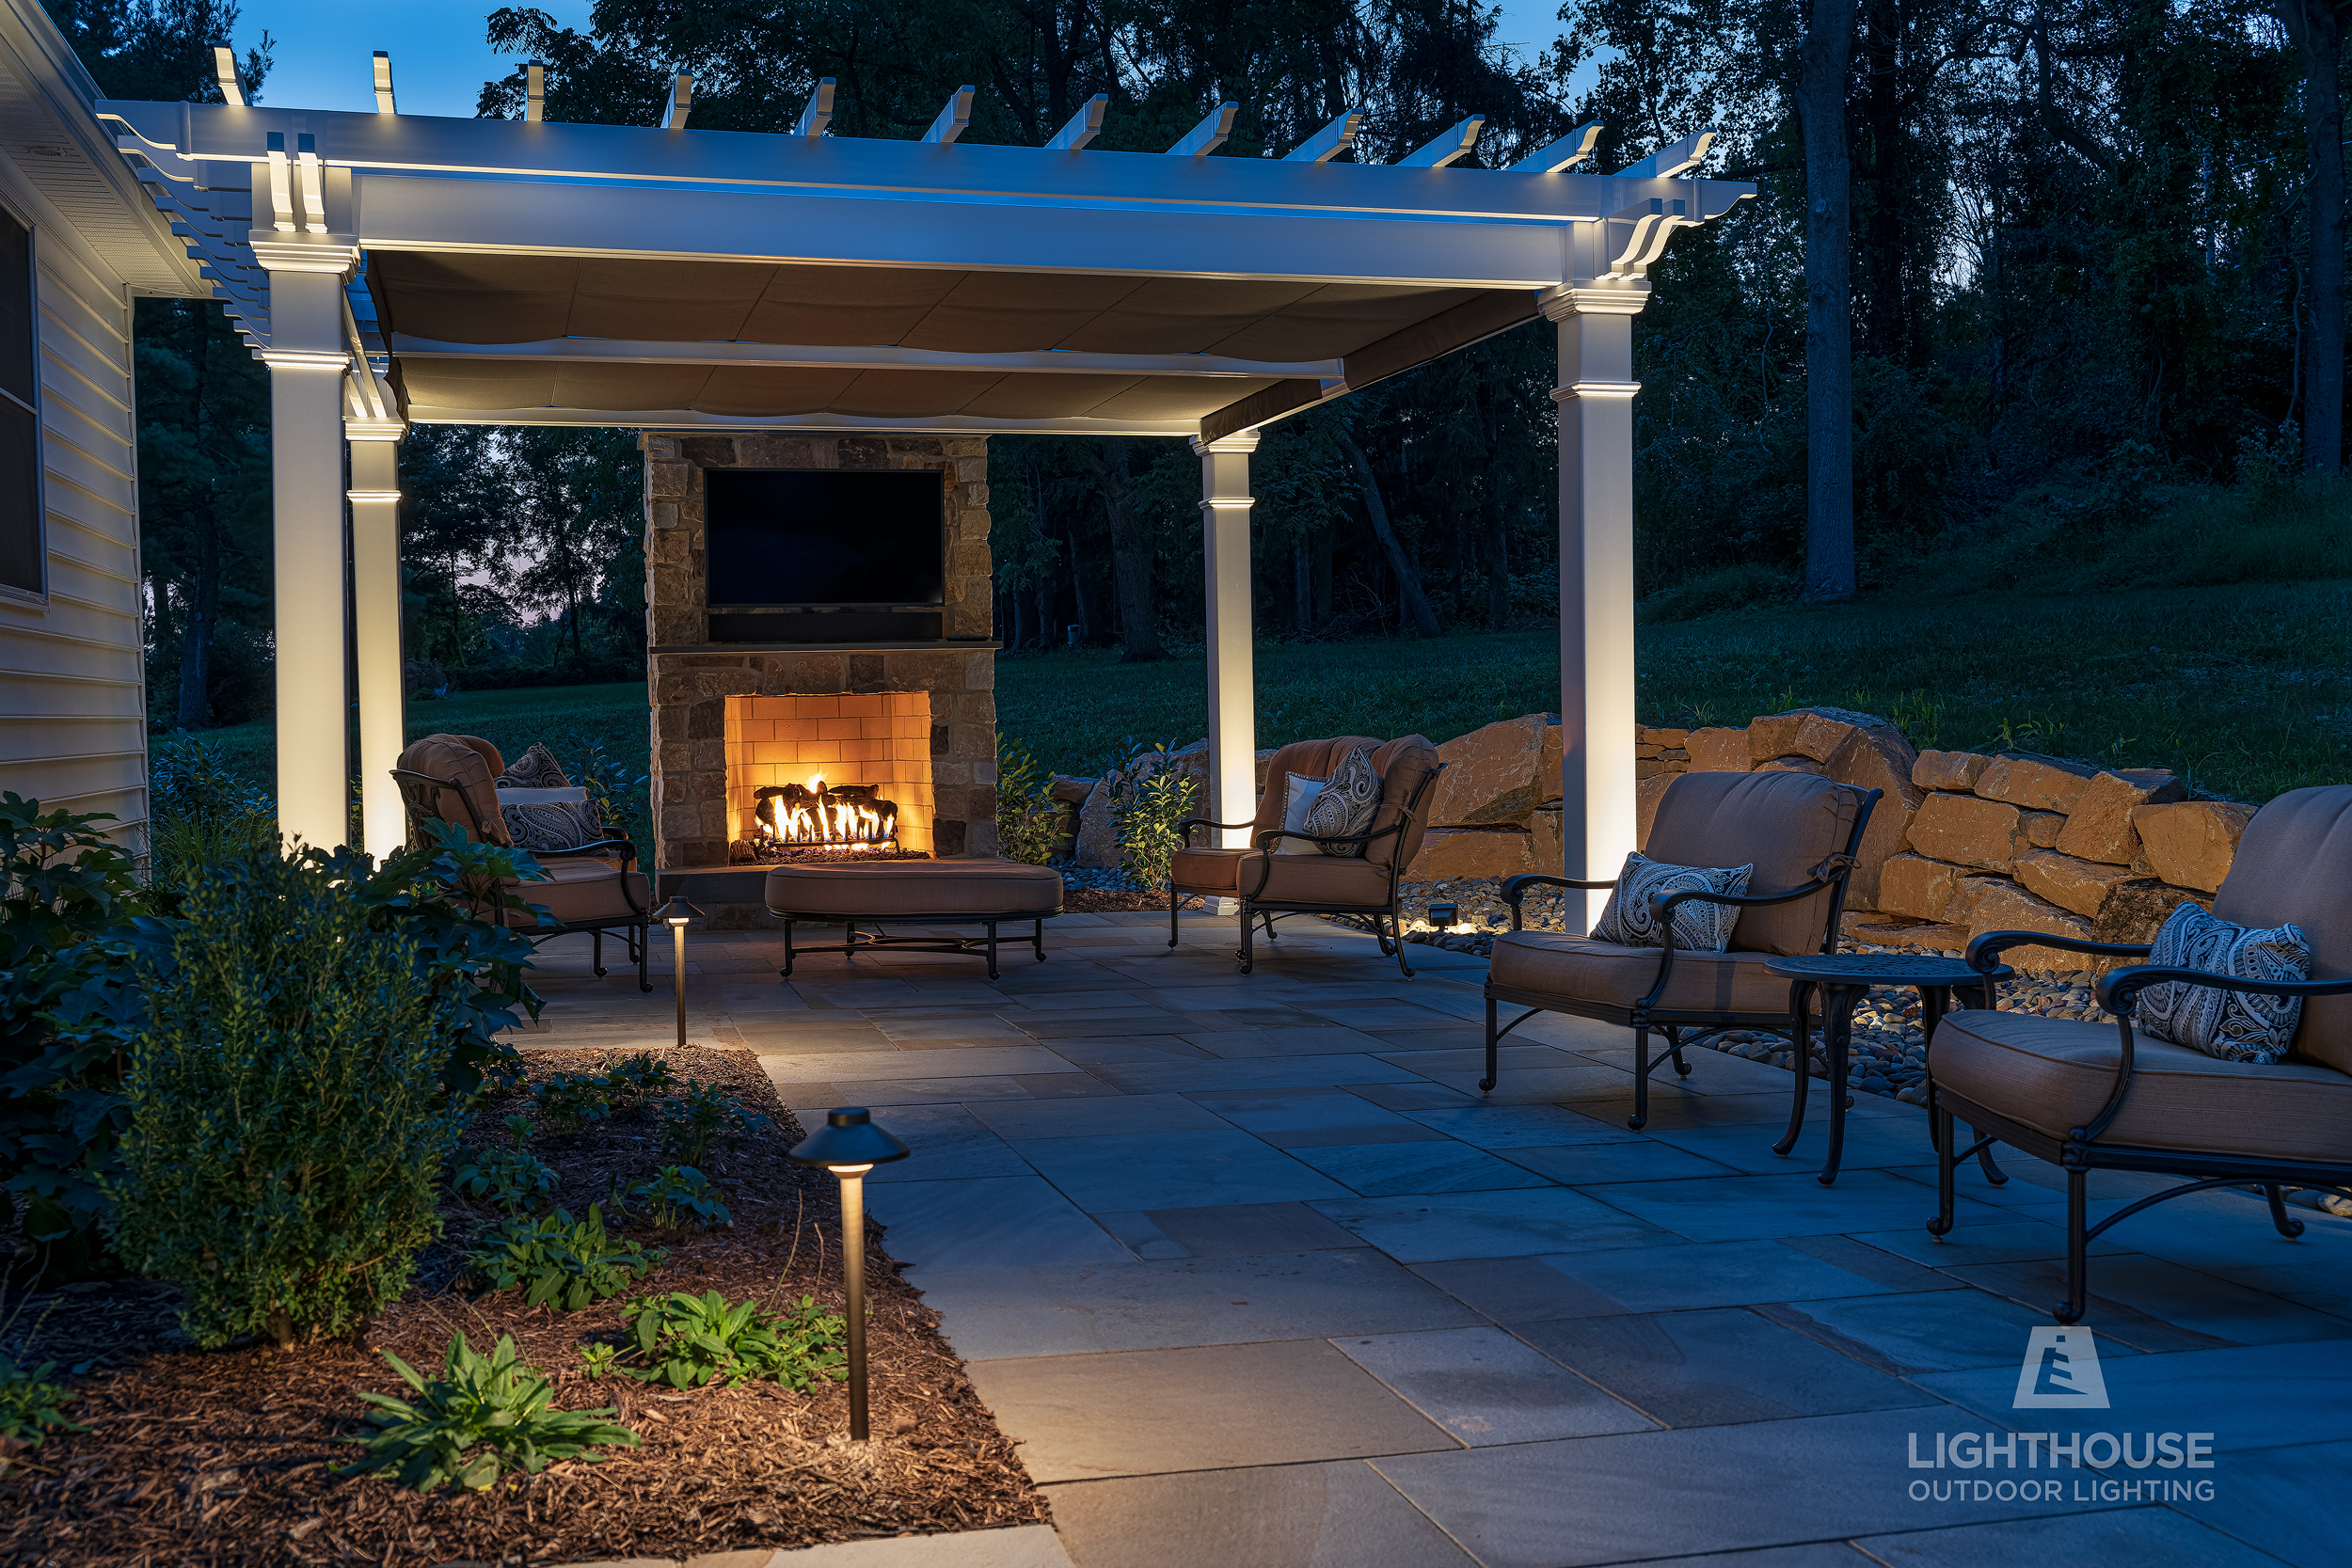 Low Voltage Landscape Lighting in Amesbury, MA